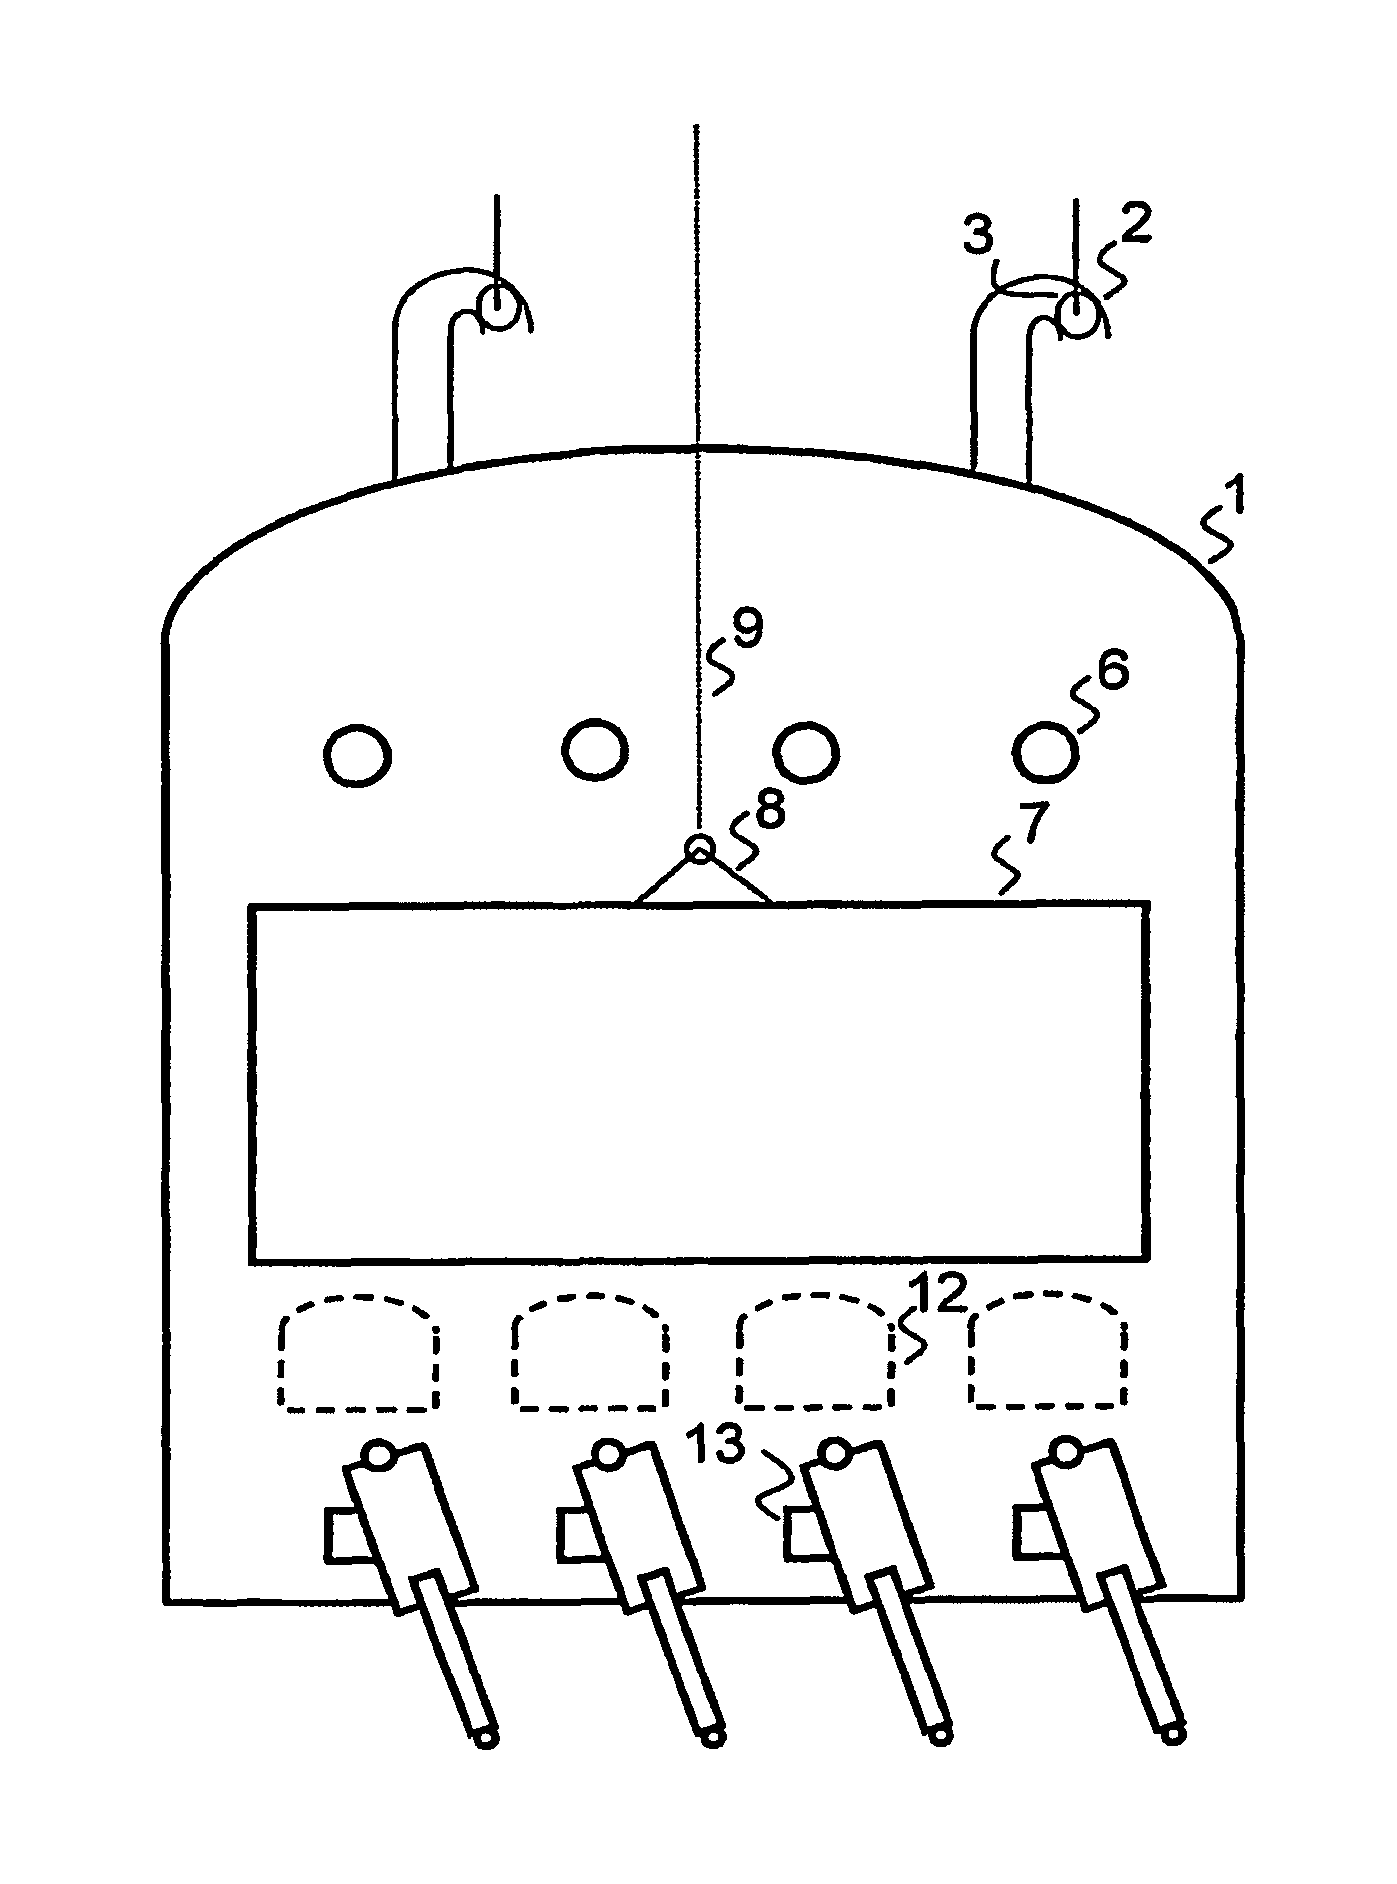 Device for feeding combustion air or gas influencing coal carbonization into the upper area of coke ovens